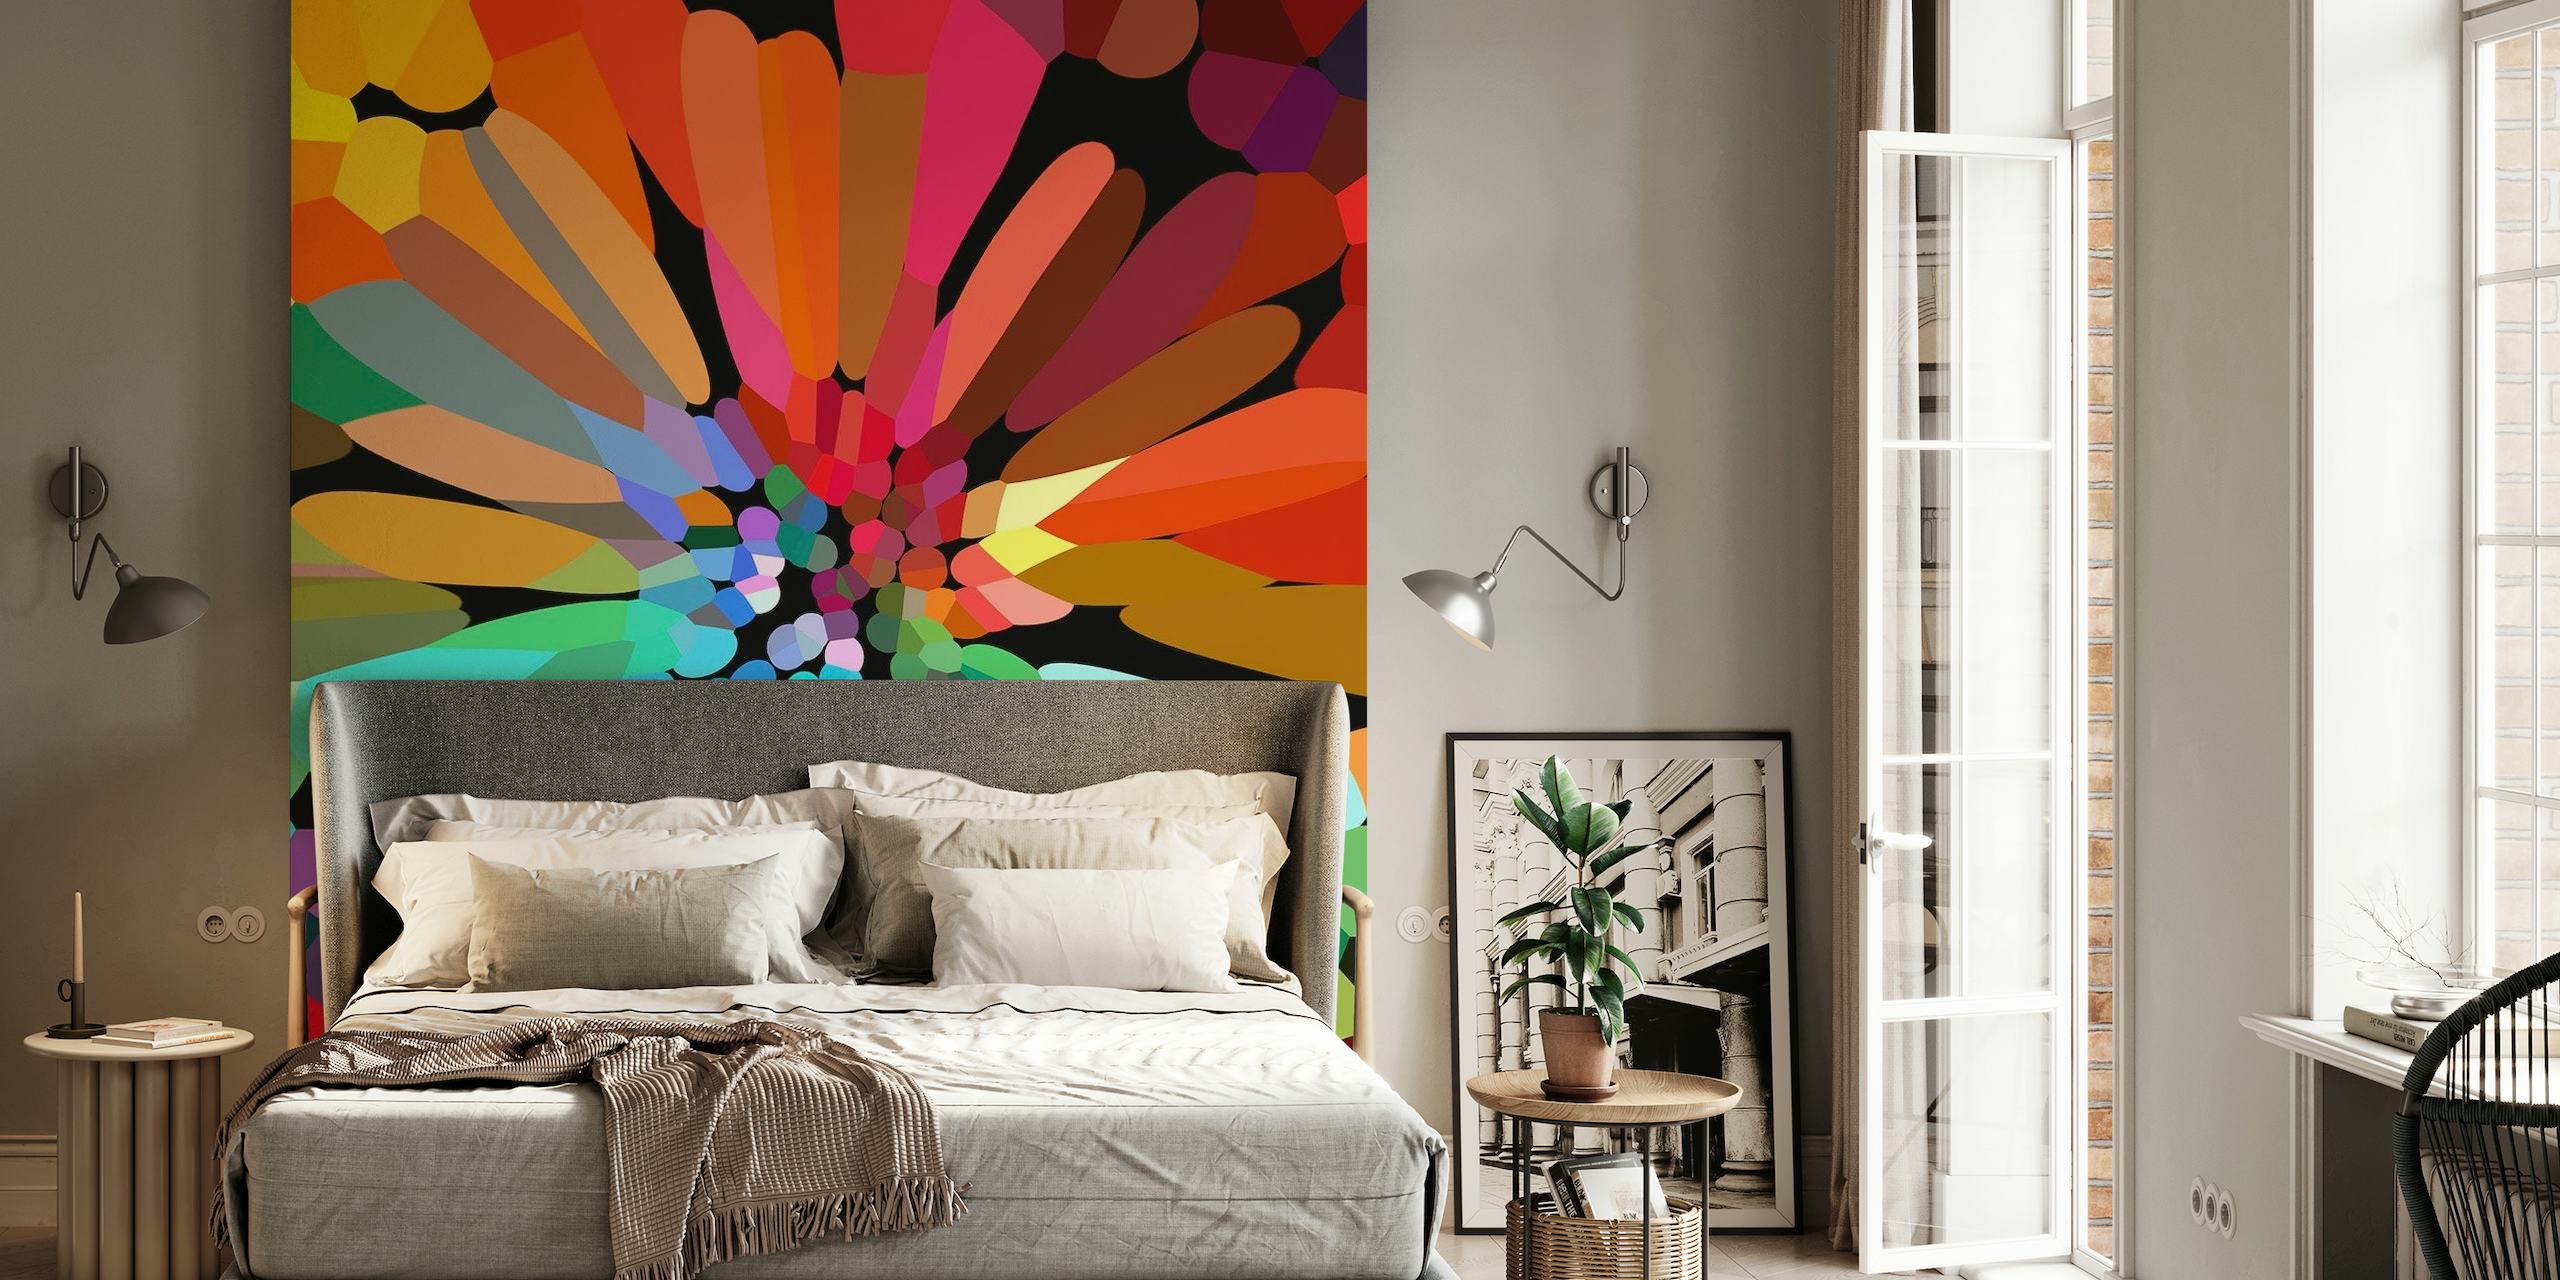 Abstract Funky Flower wall mural with a kaleidoscope of vibrant colors and floral patterns